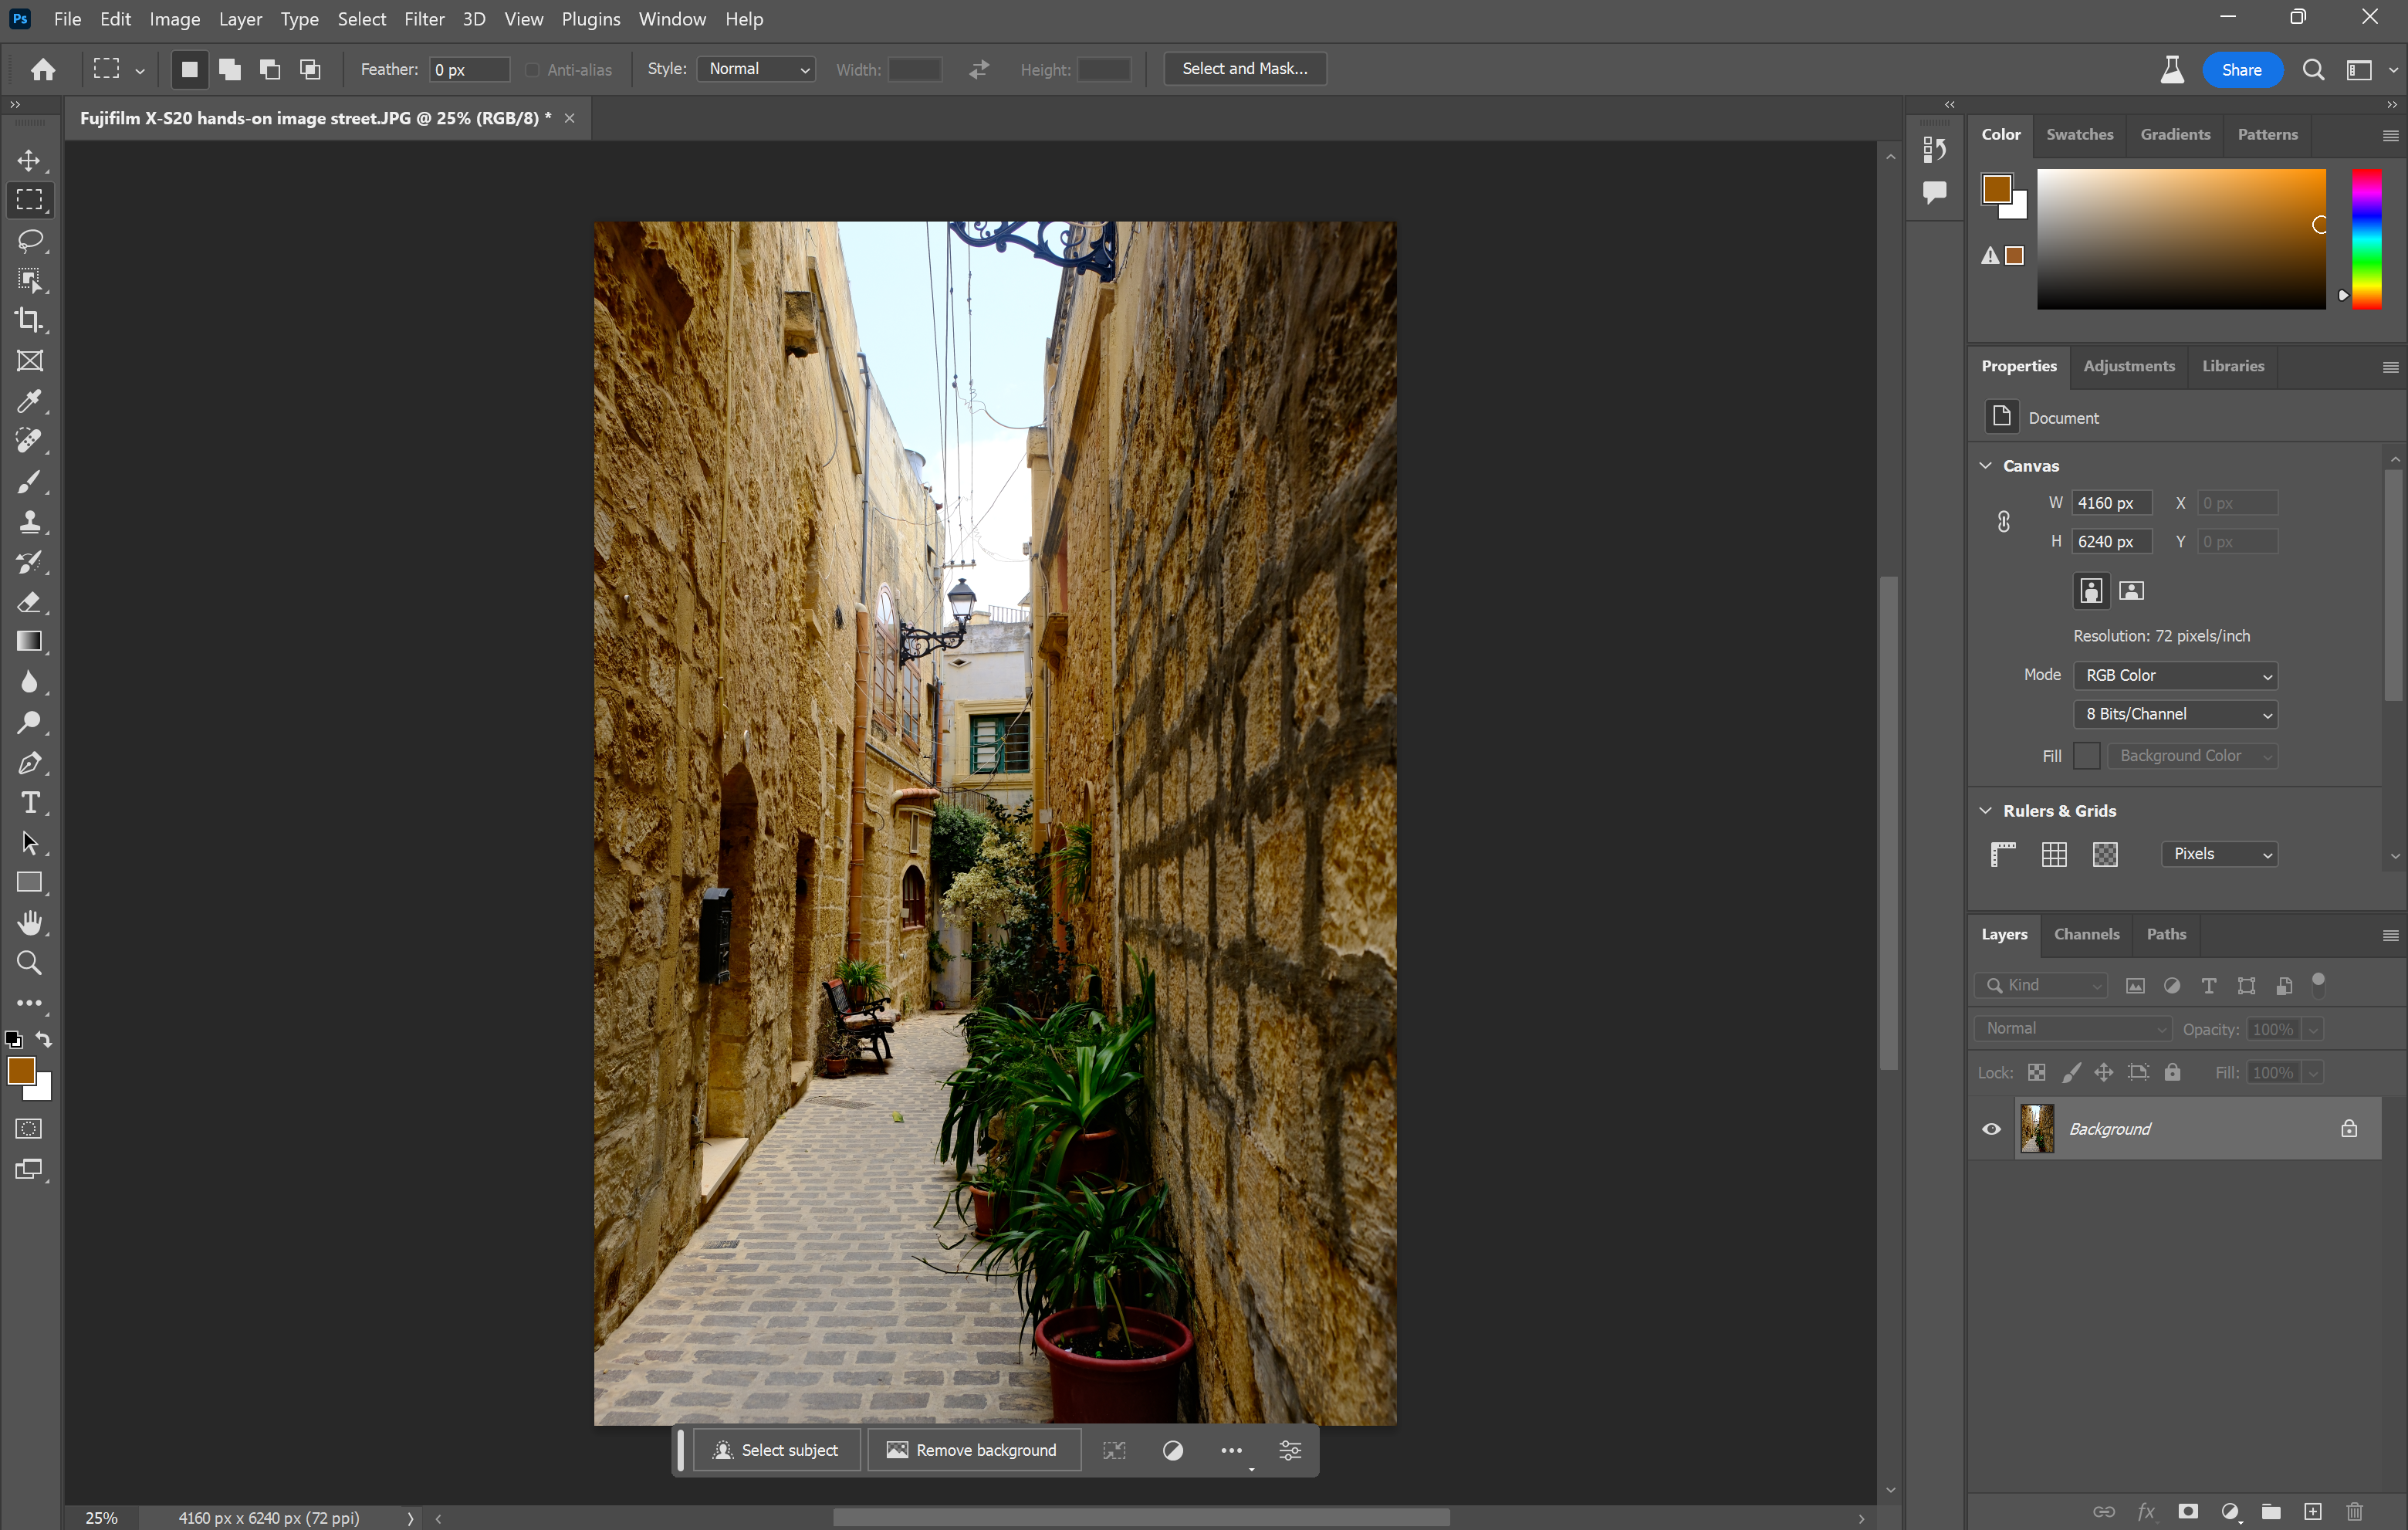 How to extend an image in Photoshop